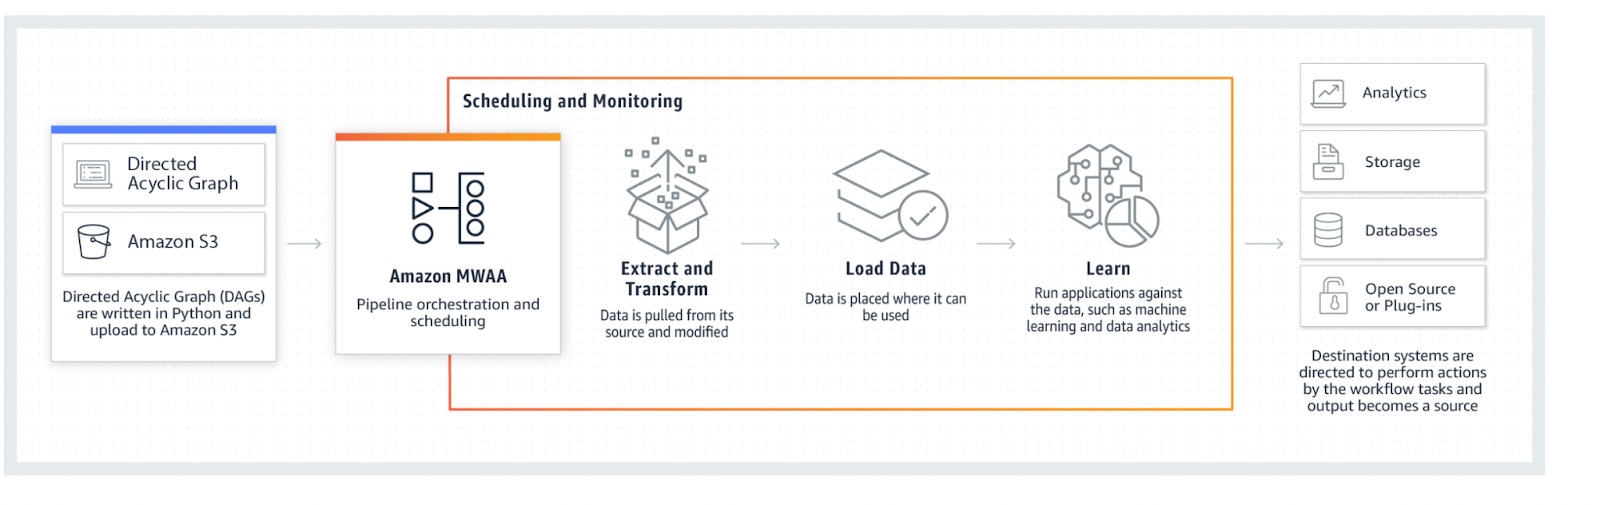 AWS Archiving Process: How it works.